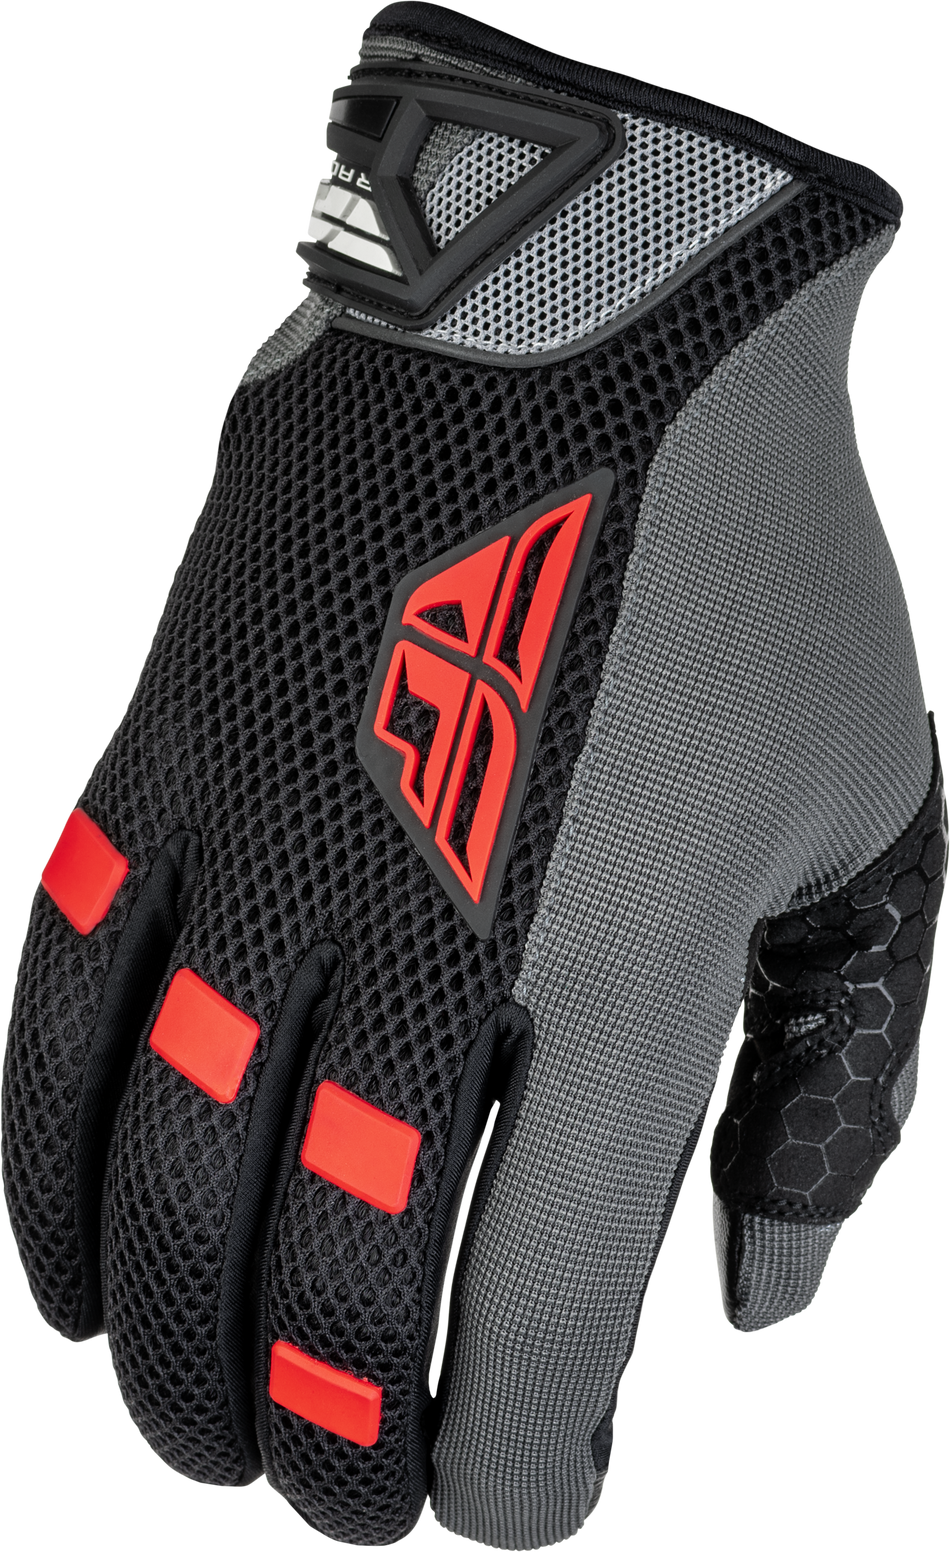 FLY RACING Coolpro Gloves Black/Red Xl 476-4026X